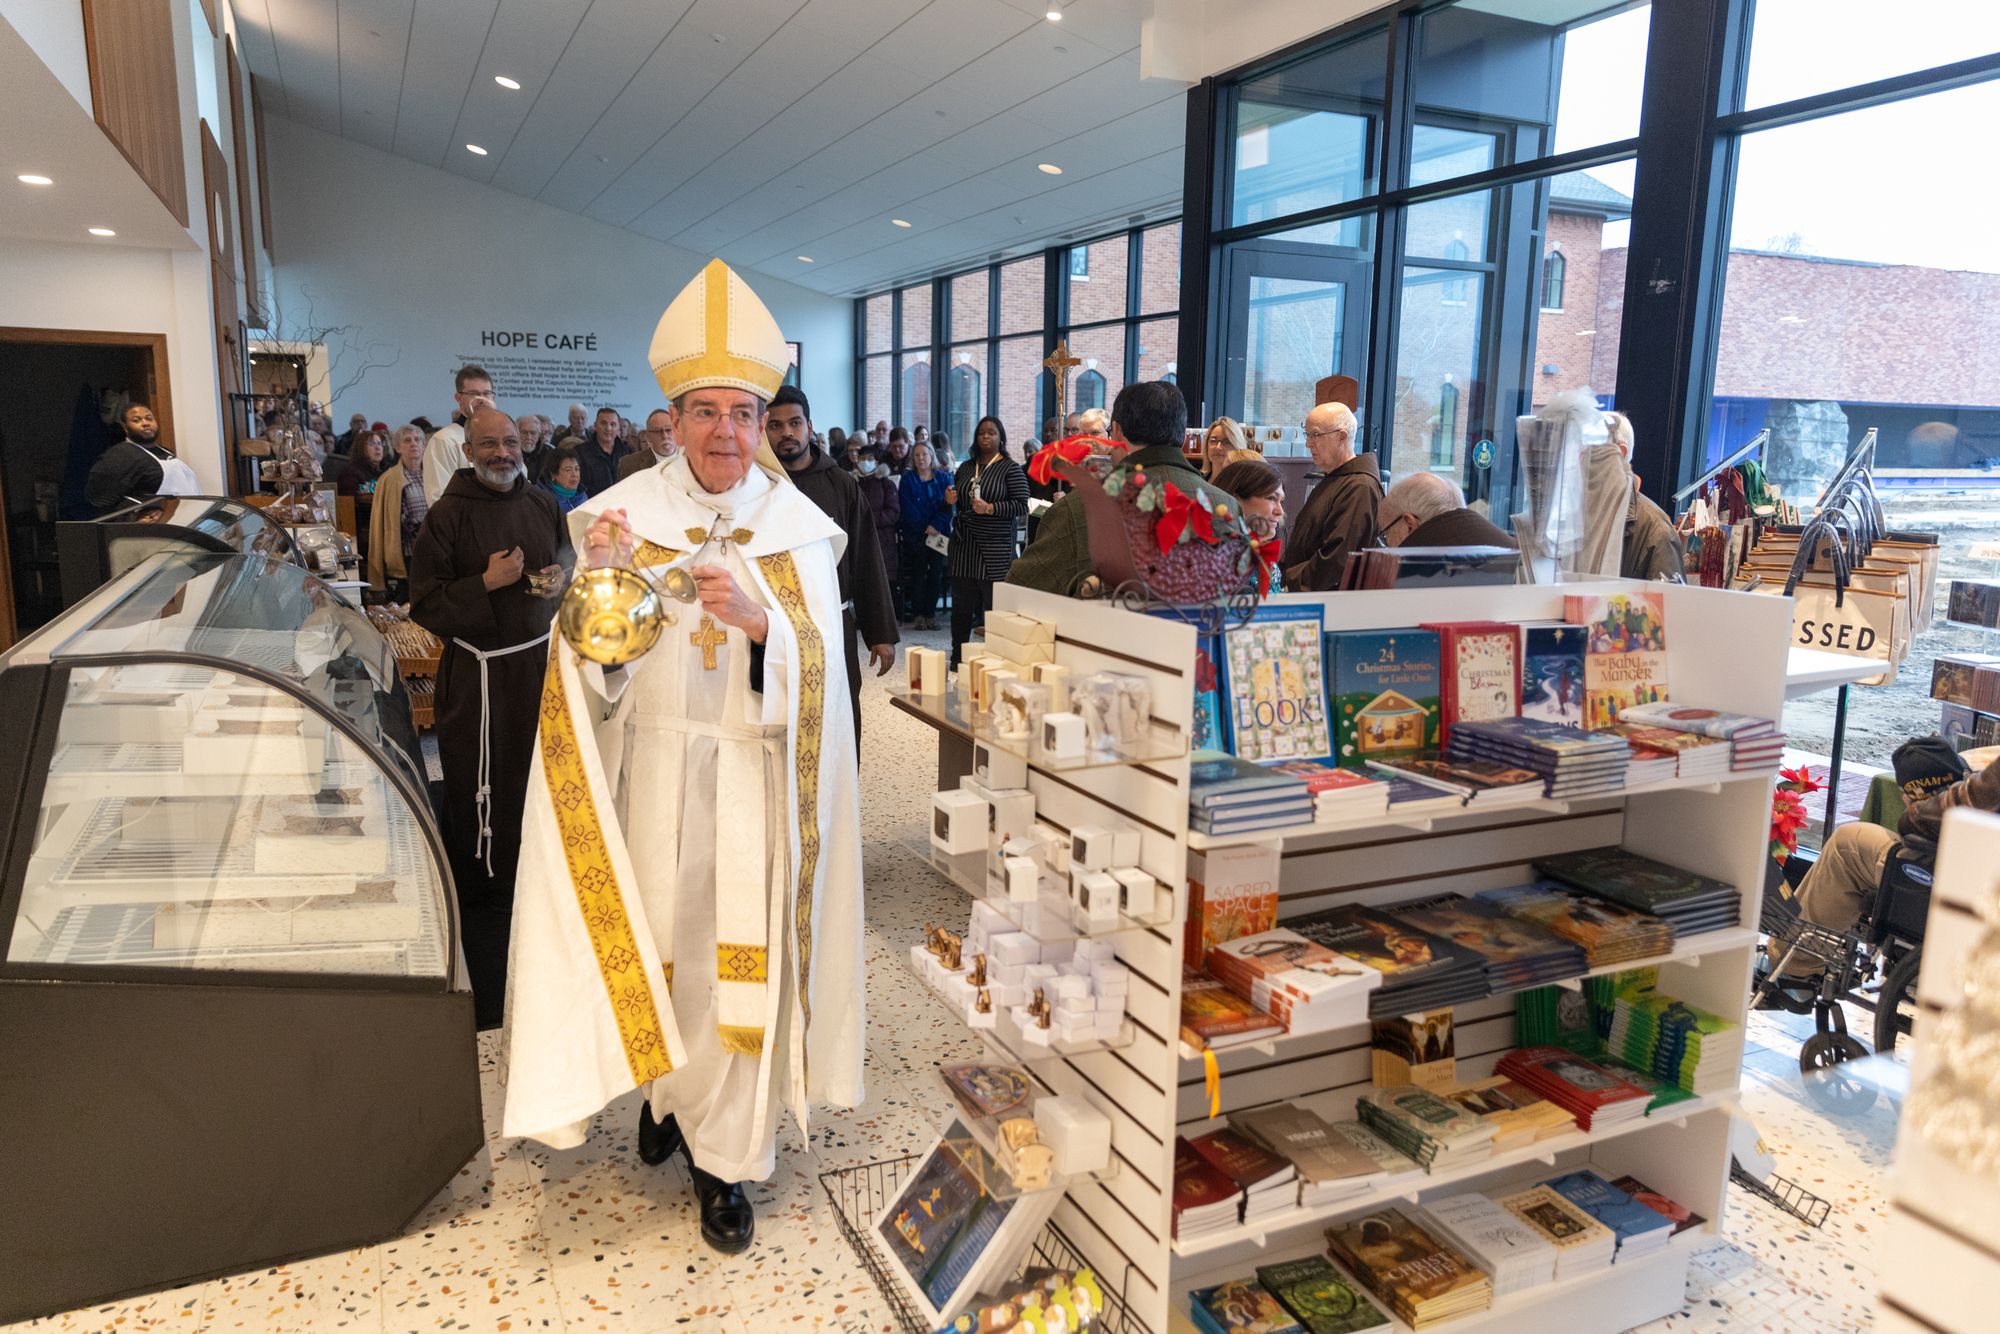 Archbishop blesses the new gift shop.